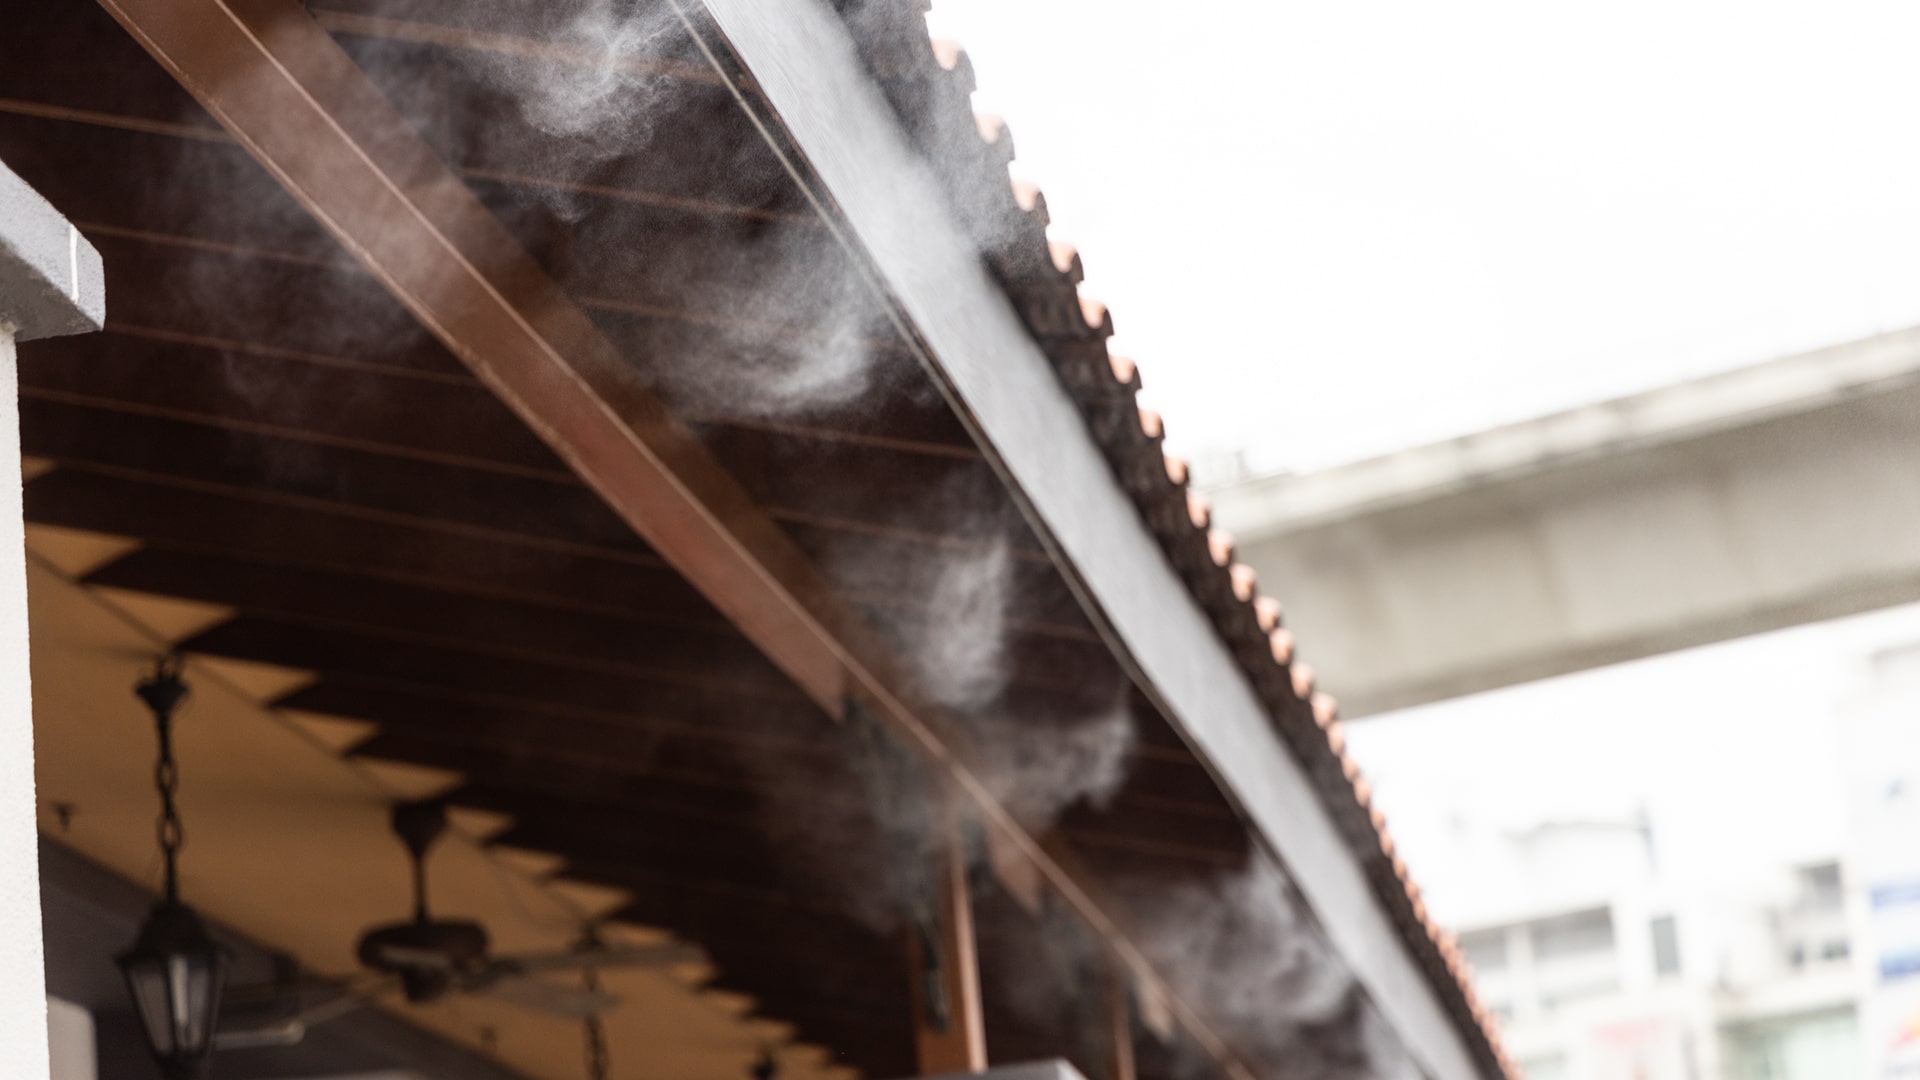 Image of Misting System on Eaves of Roof